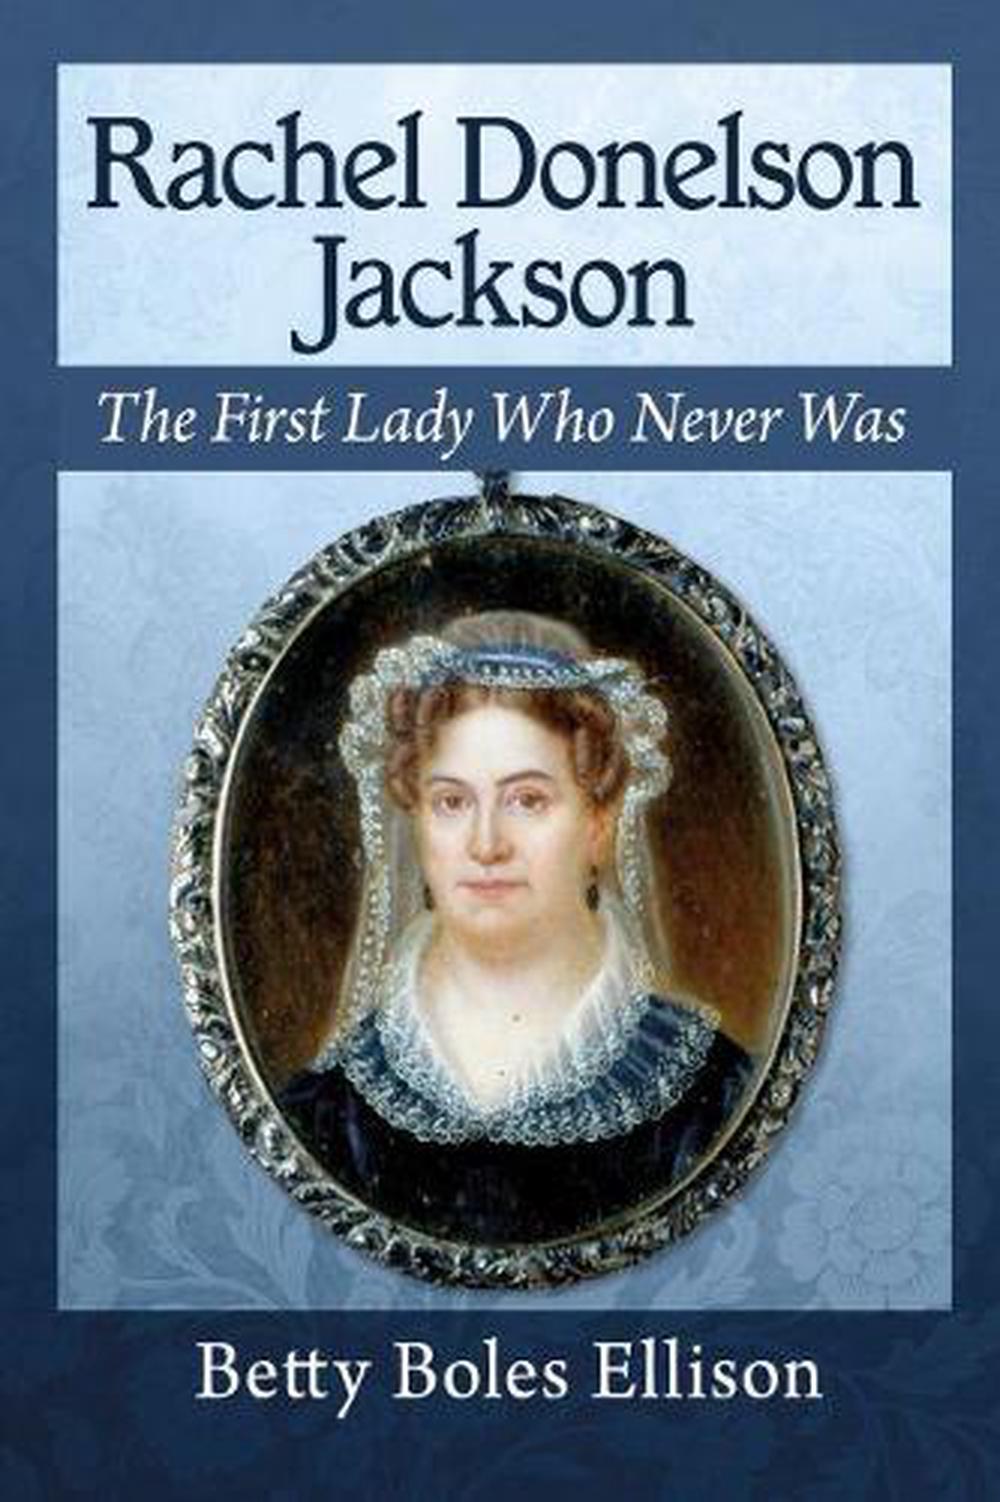 Rachel Donelson Jackson: The Life of the First Lady Who Never Was by ...